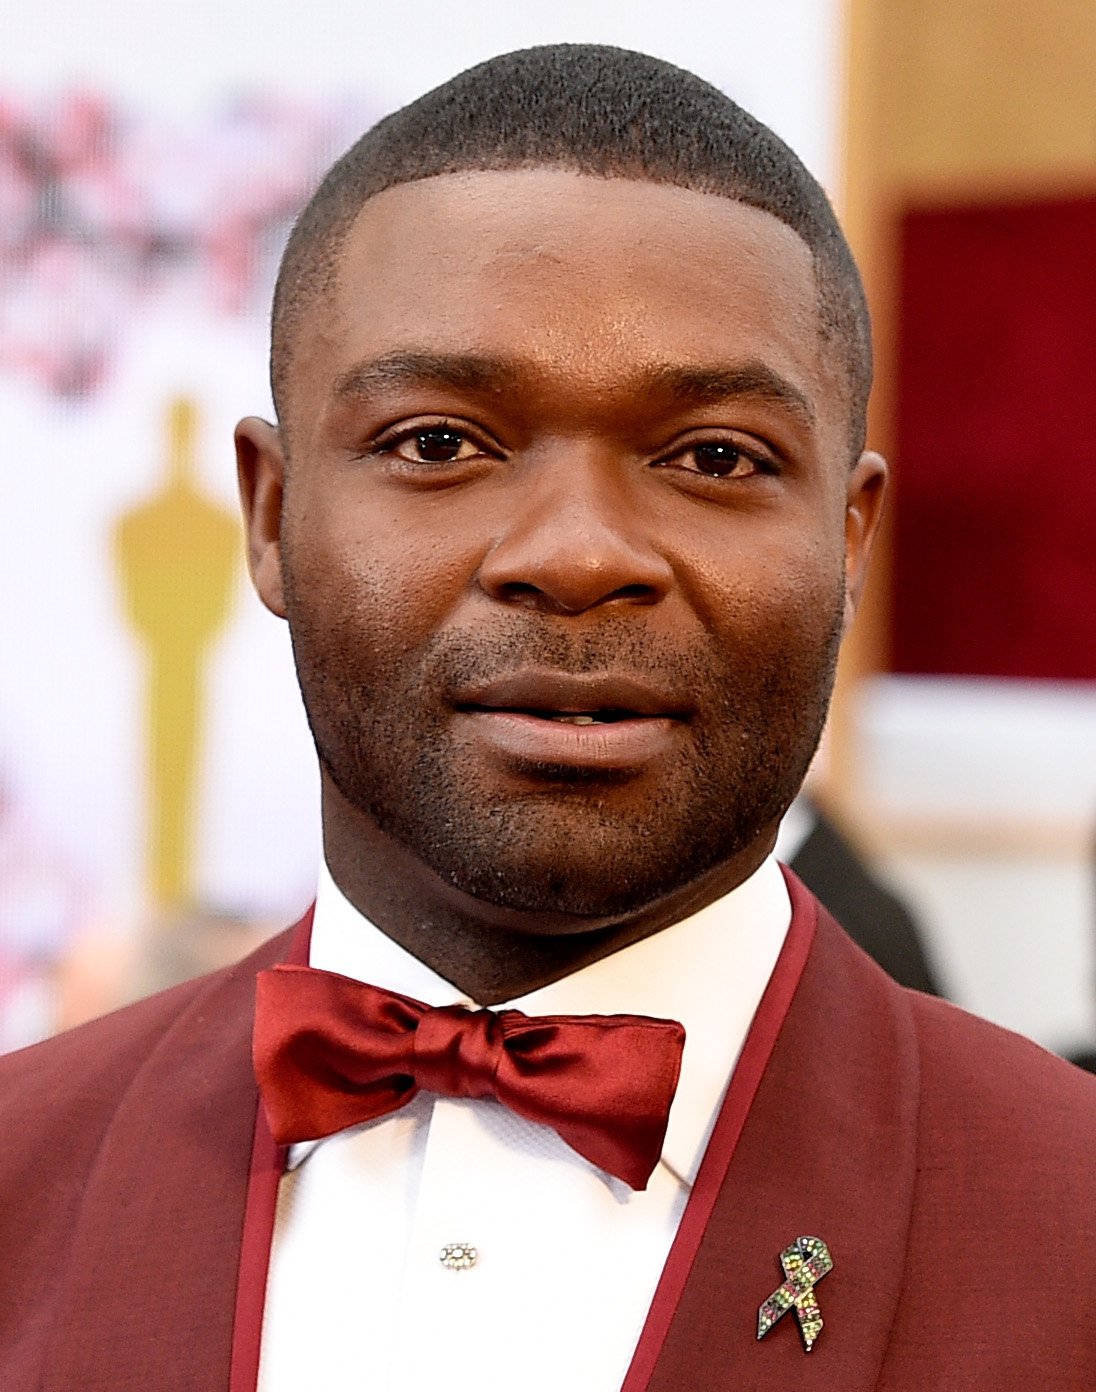 David Oyelowo Will Be The First Black Actor To Voice James Bond Does This Mean We Re Close To Seeing A Black Actor Play 007